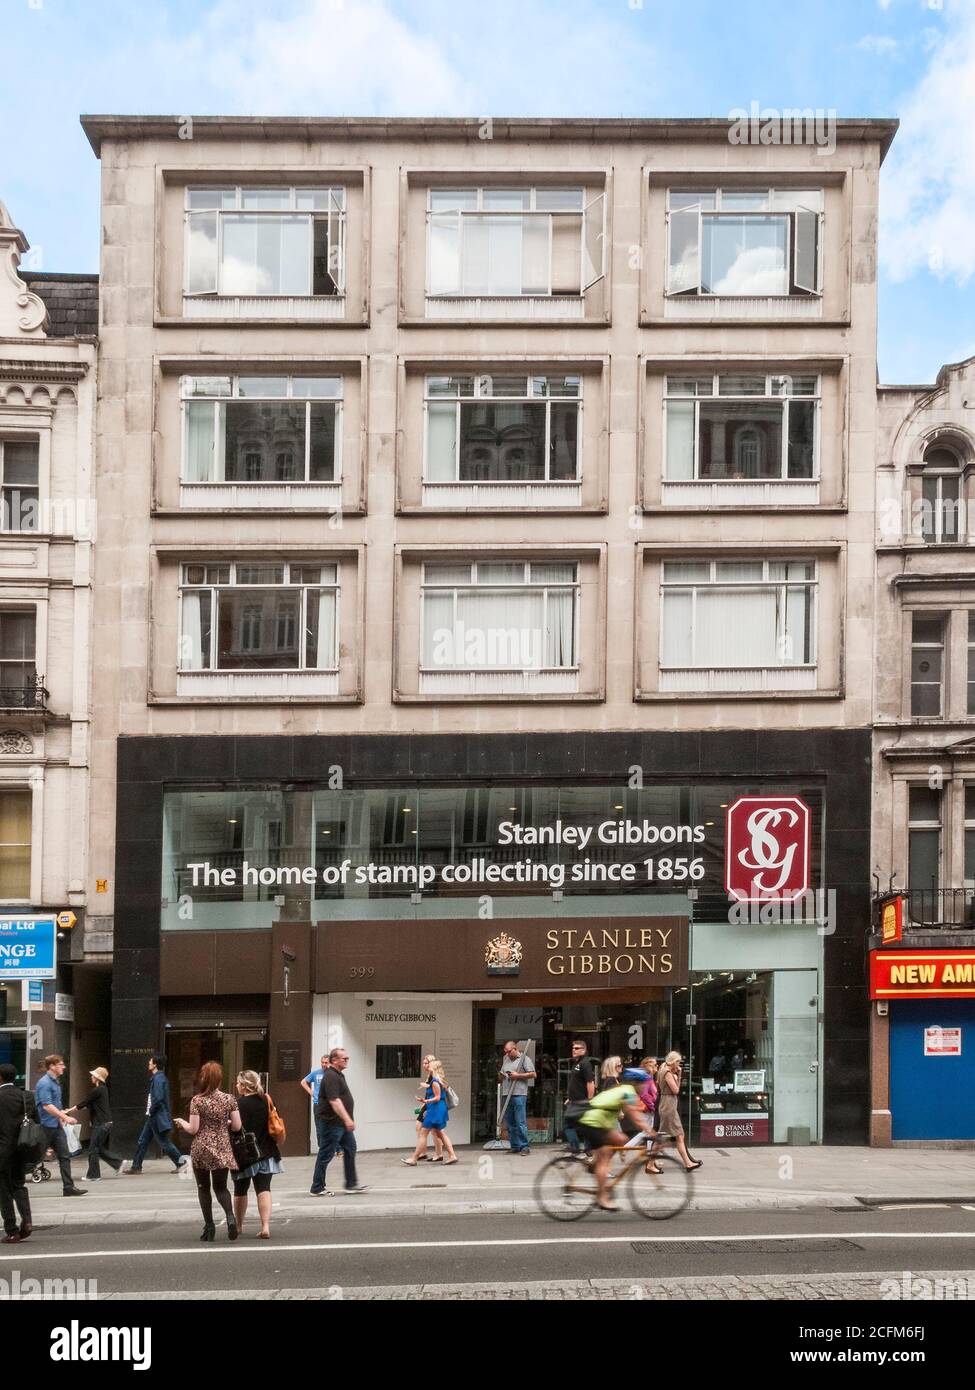 London, England, UK, June 11, 2014 :  Stanley Gibbons stamp shop in the Strand a popular stamp collector retailer for philatelist in the city centre s Stock Photo